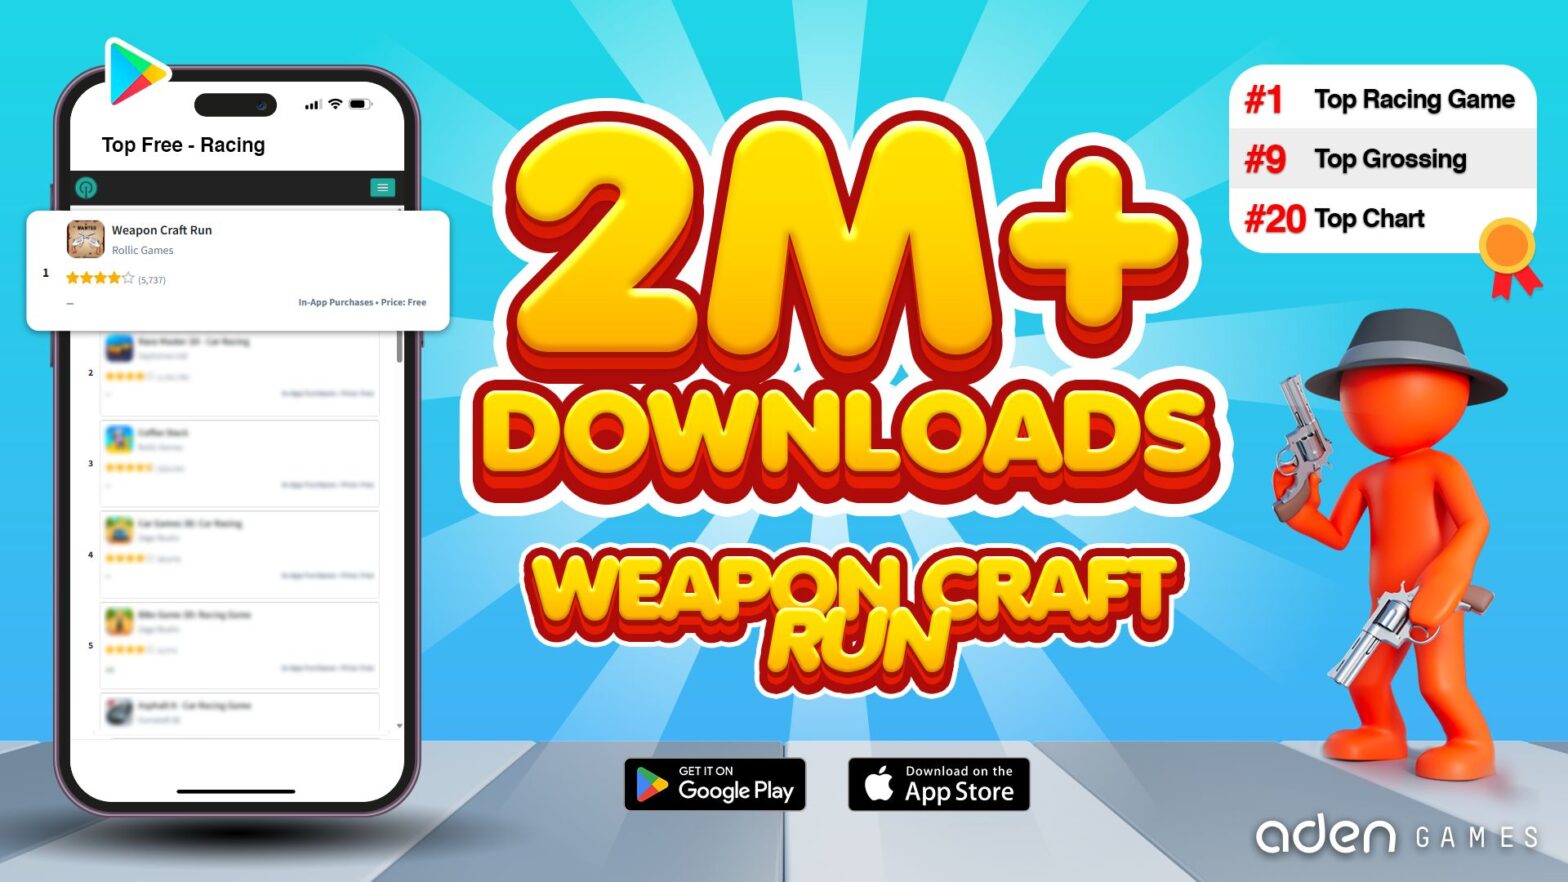 Weapon Craft Run reached #1 on Racing Top Charts